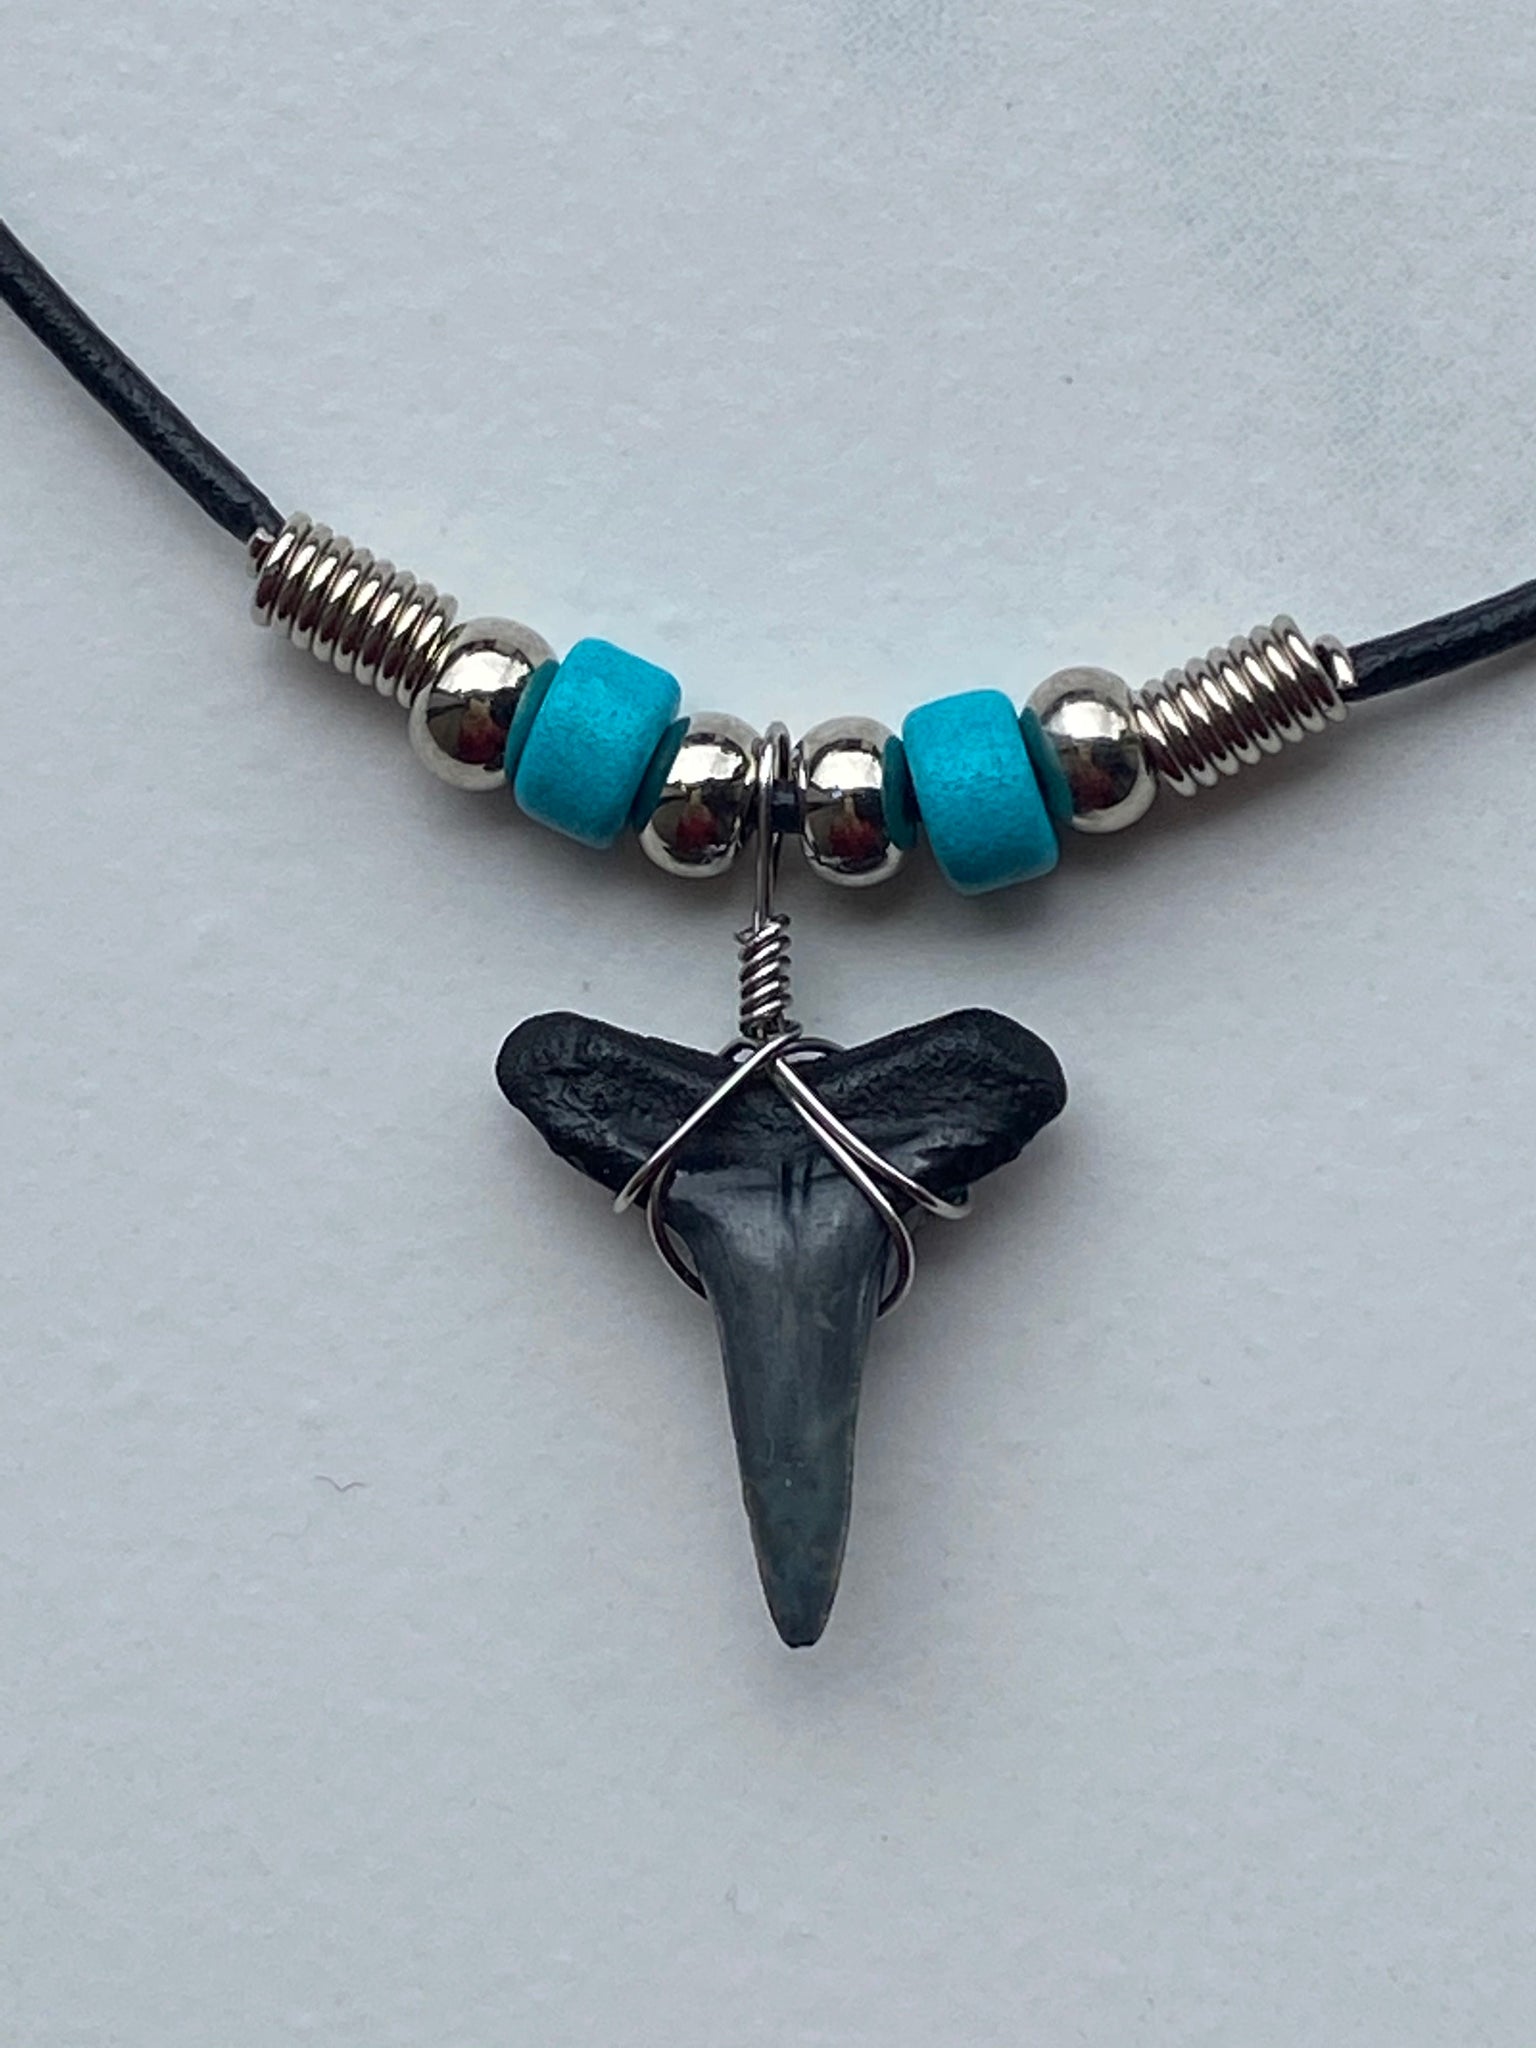 Imitation Resin Shark Tooth Pendant Necklace Wood Beaded Black Cord Ch